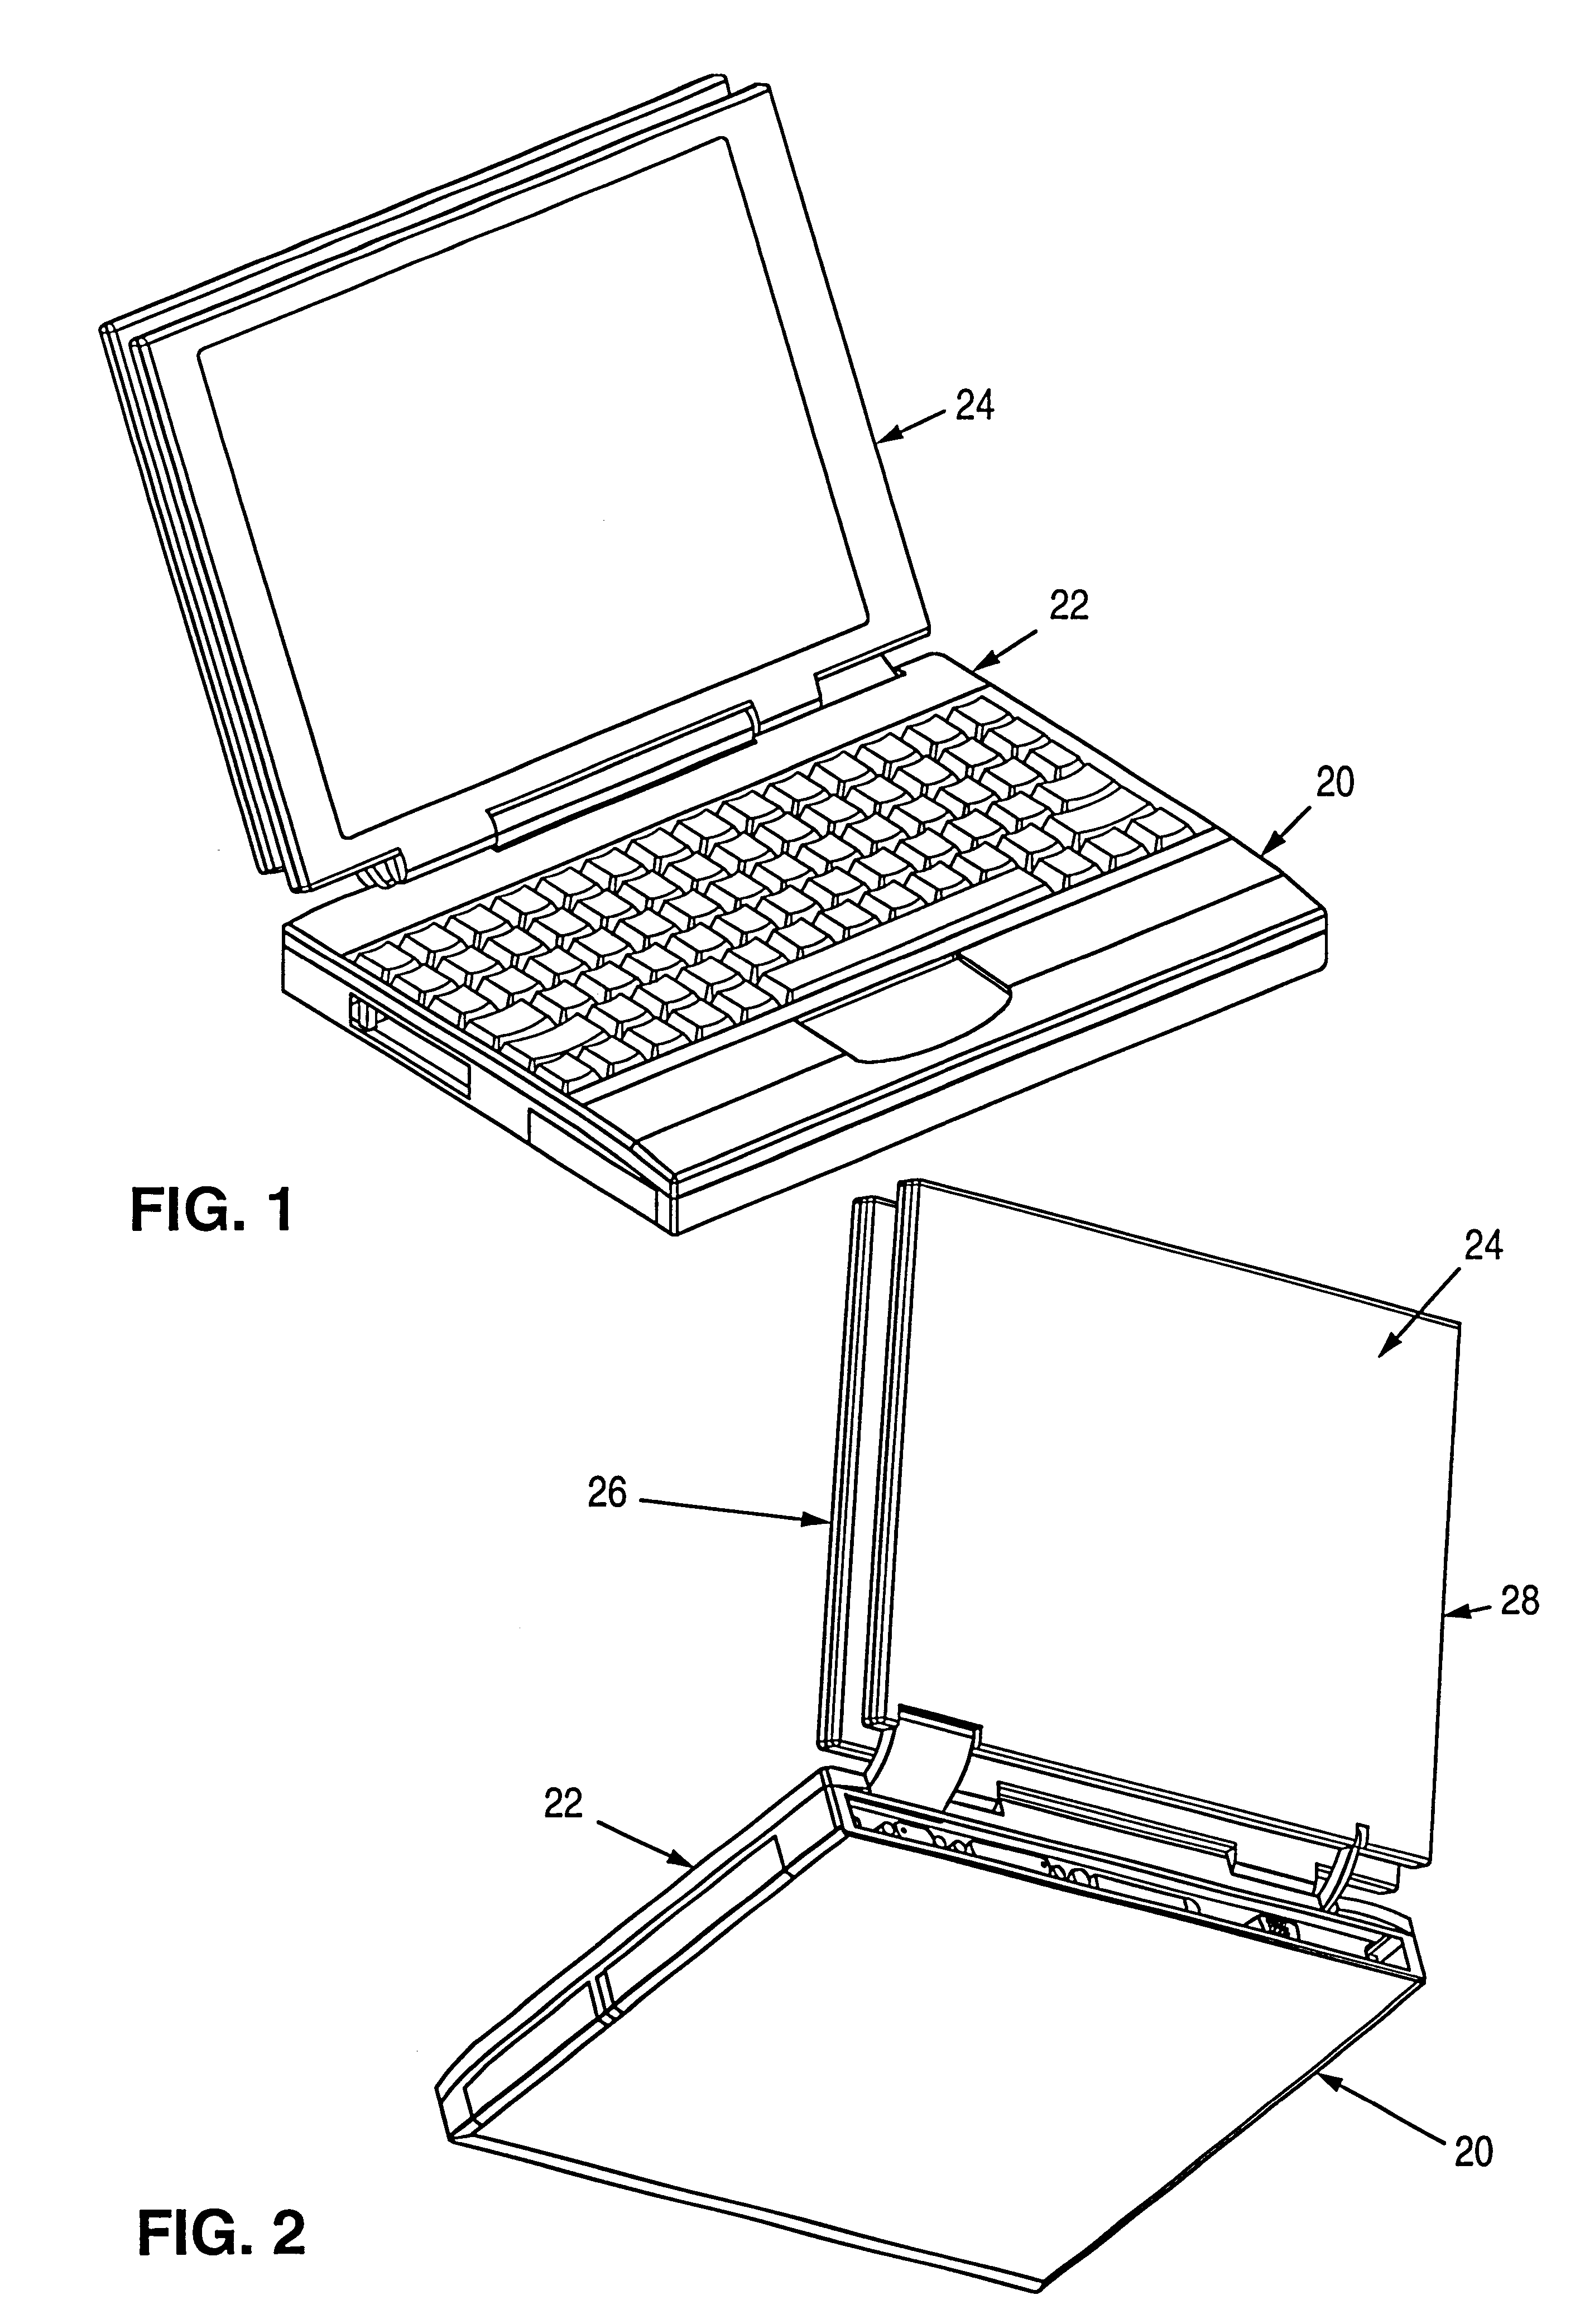 Thermally efficient computer incorporating deploying CPU module